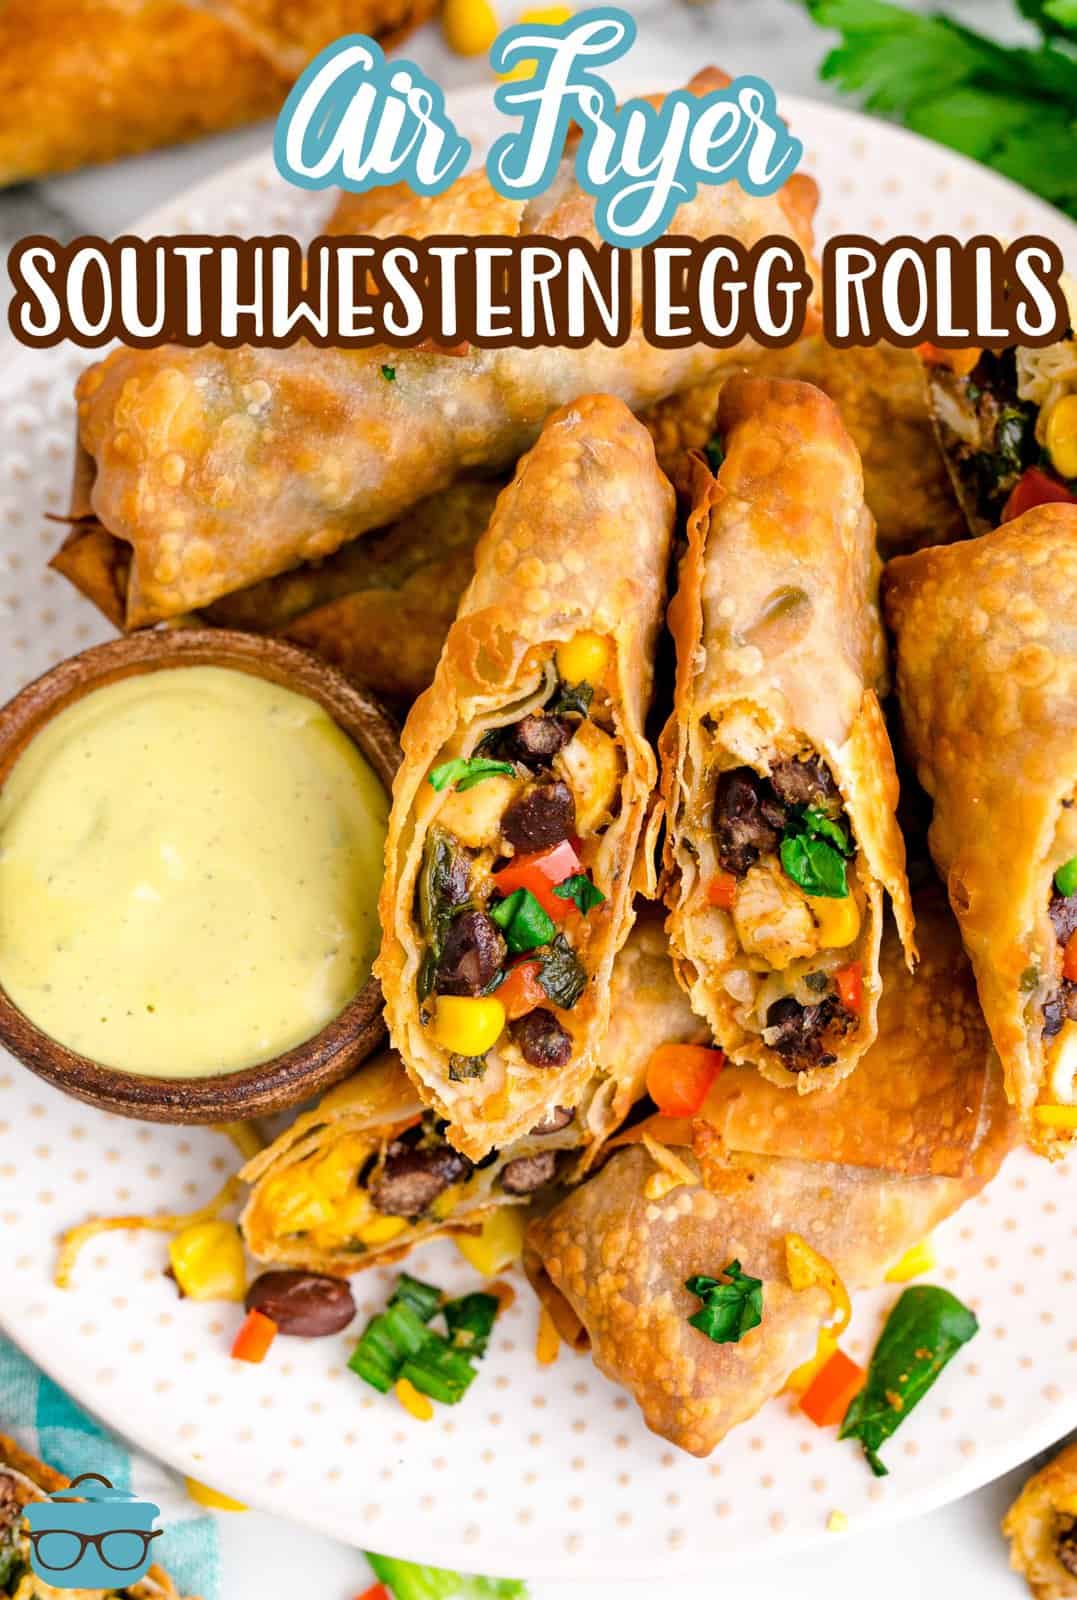 A plate of air fried Southwestern Egg Rolls with dipping sauce.